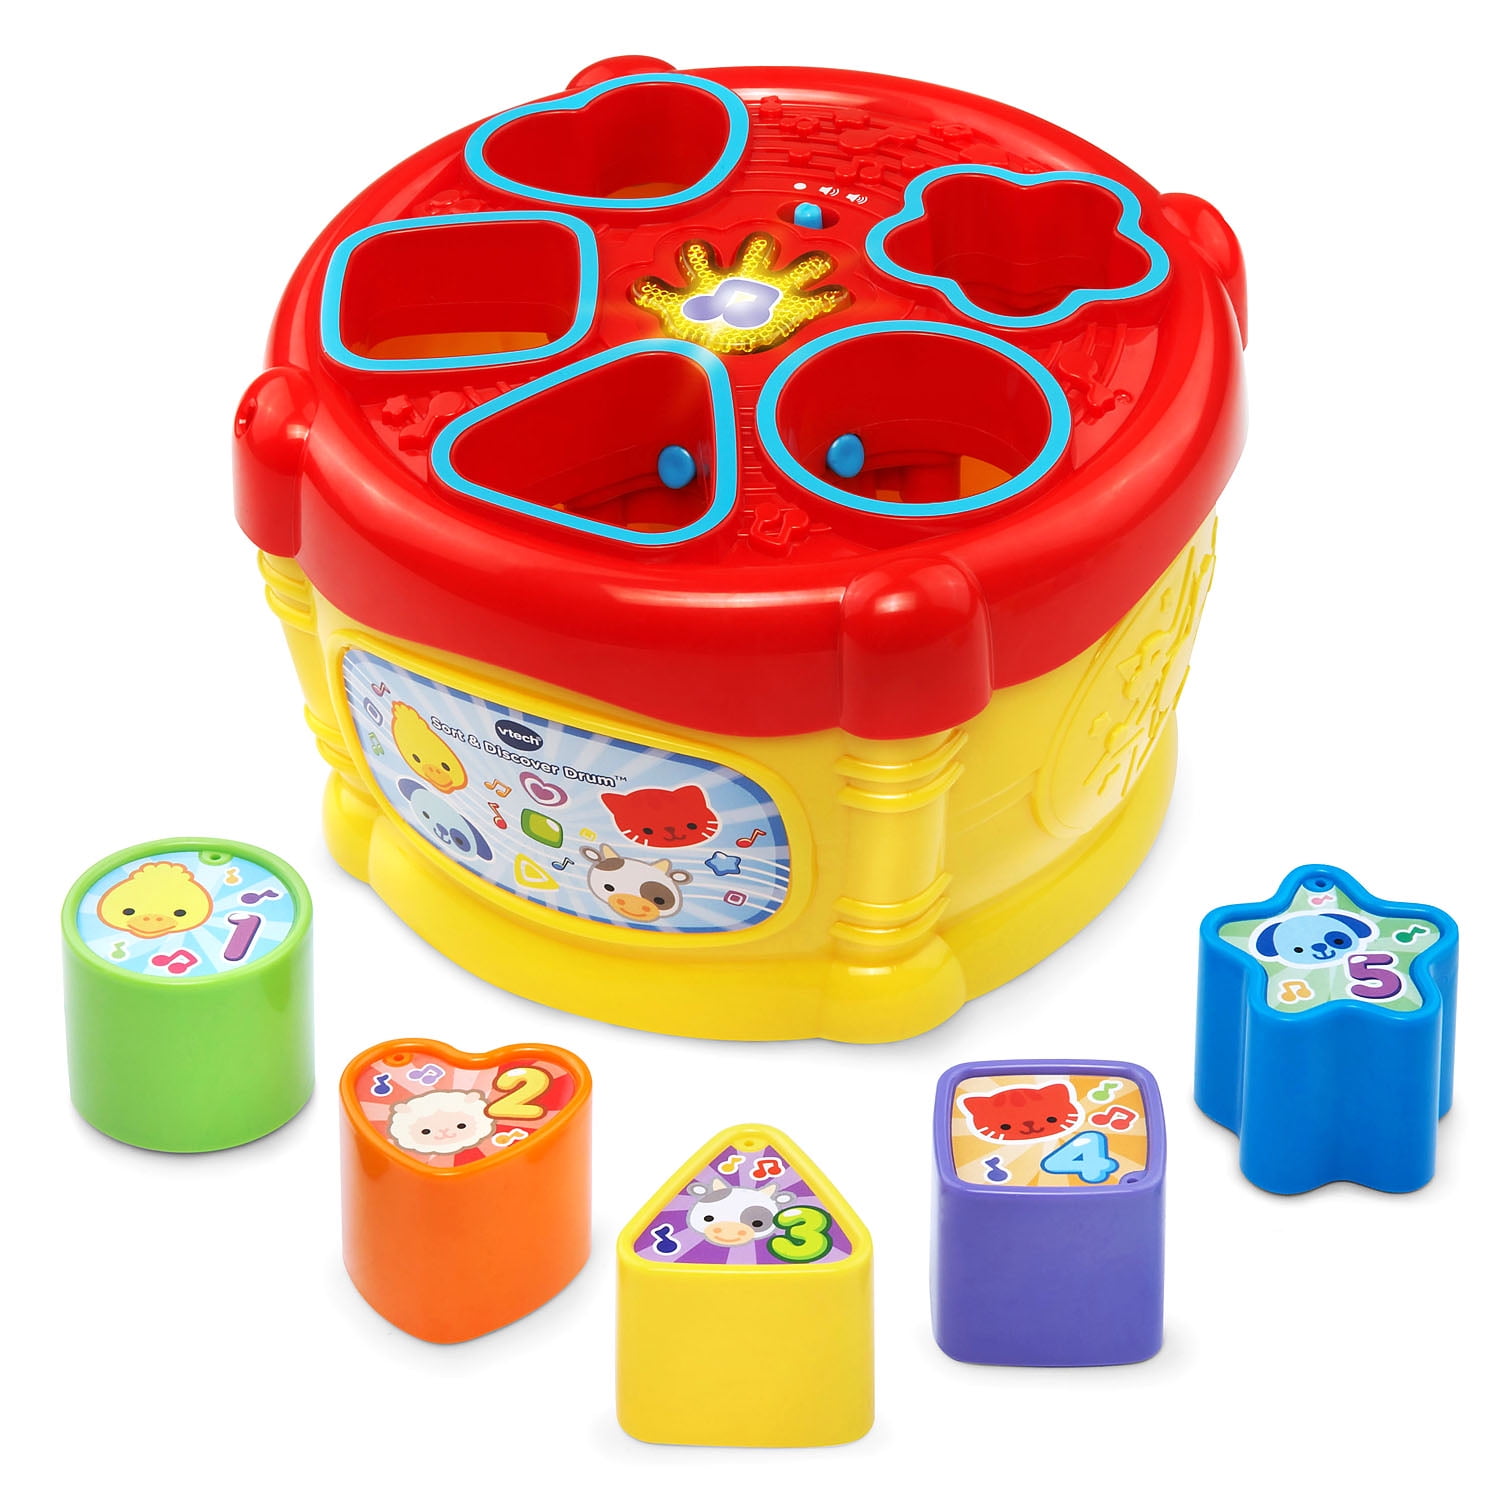 Kids Children's Shape Sorter Ball Colourful Toddler Learning Educational Toy Fun 